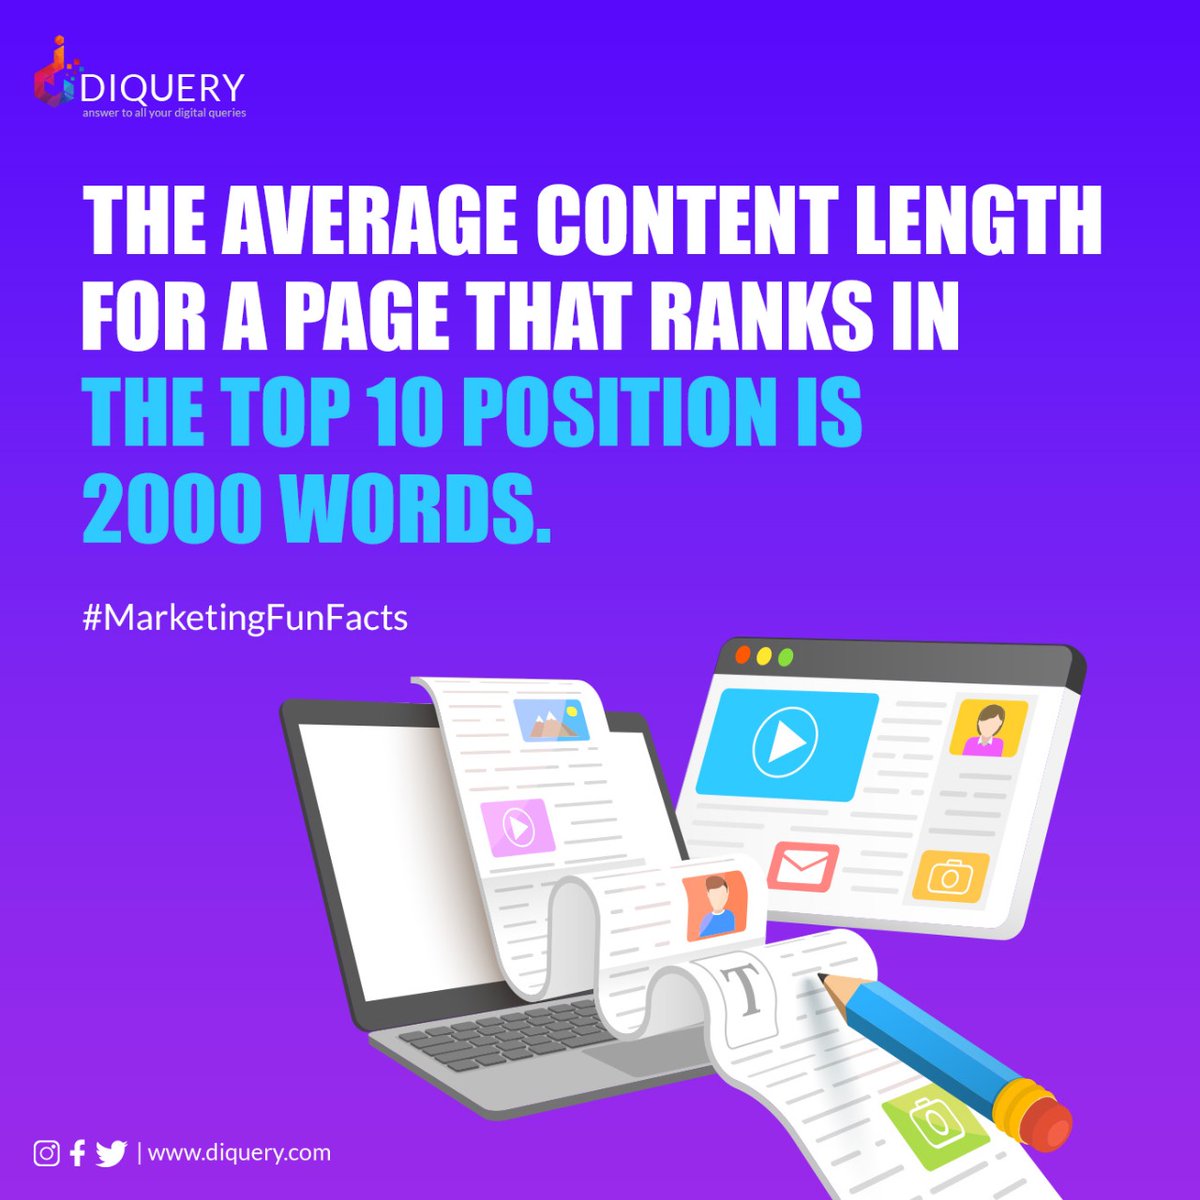 Now we can definitely say, words have power😎

#contentwriter #contentcreation #contentmarketing #contentideas #contentstrategy #marketingtips #digitalmarketing #socialmediamarketing #contentlength #contentwriting #copywriting #contentinspiration  #DigitalAgency #DiqueryDigital